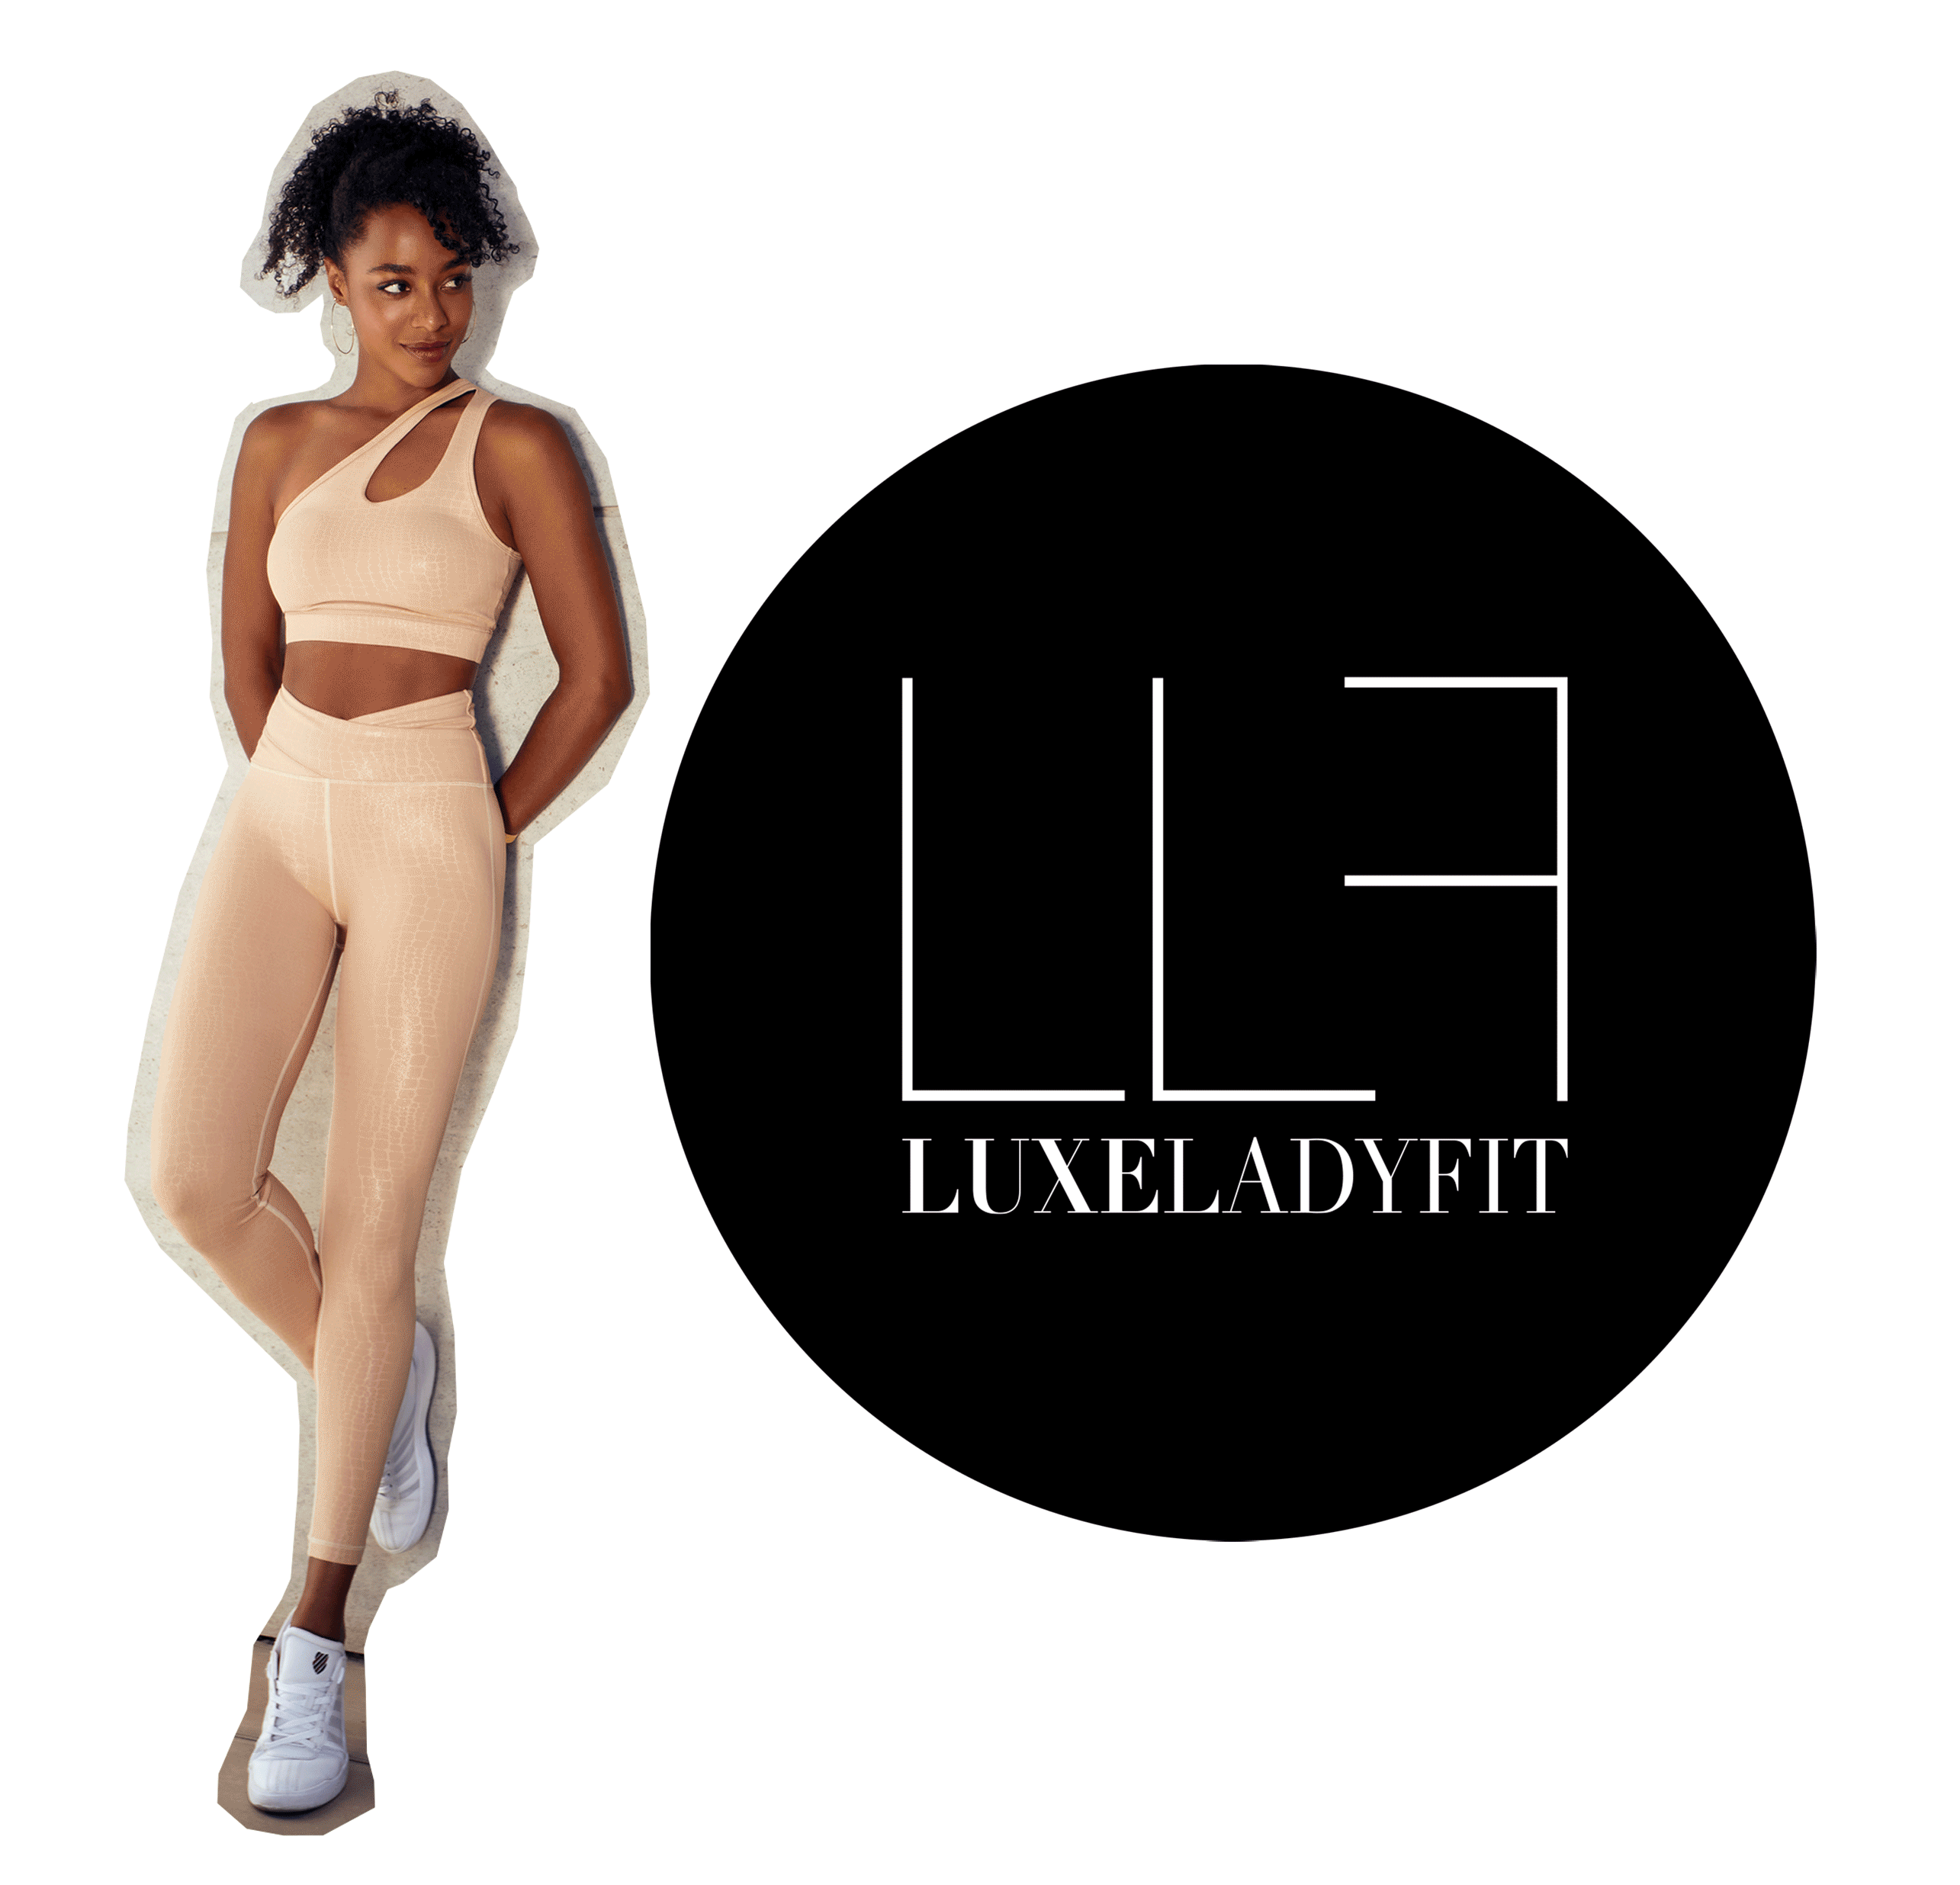 Luxe Lady Fit GIFs on GIPHY - Be Animated